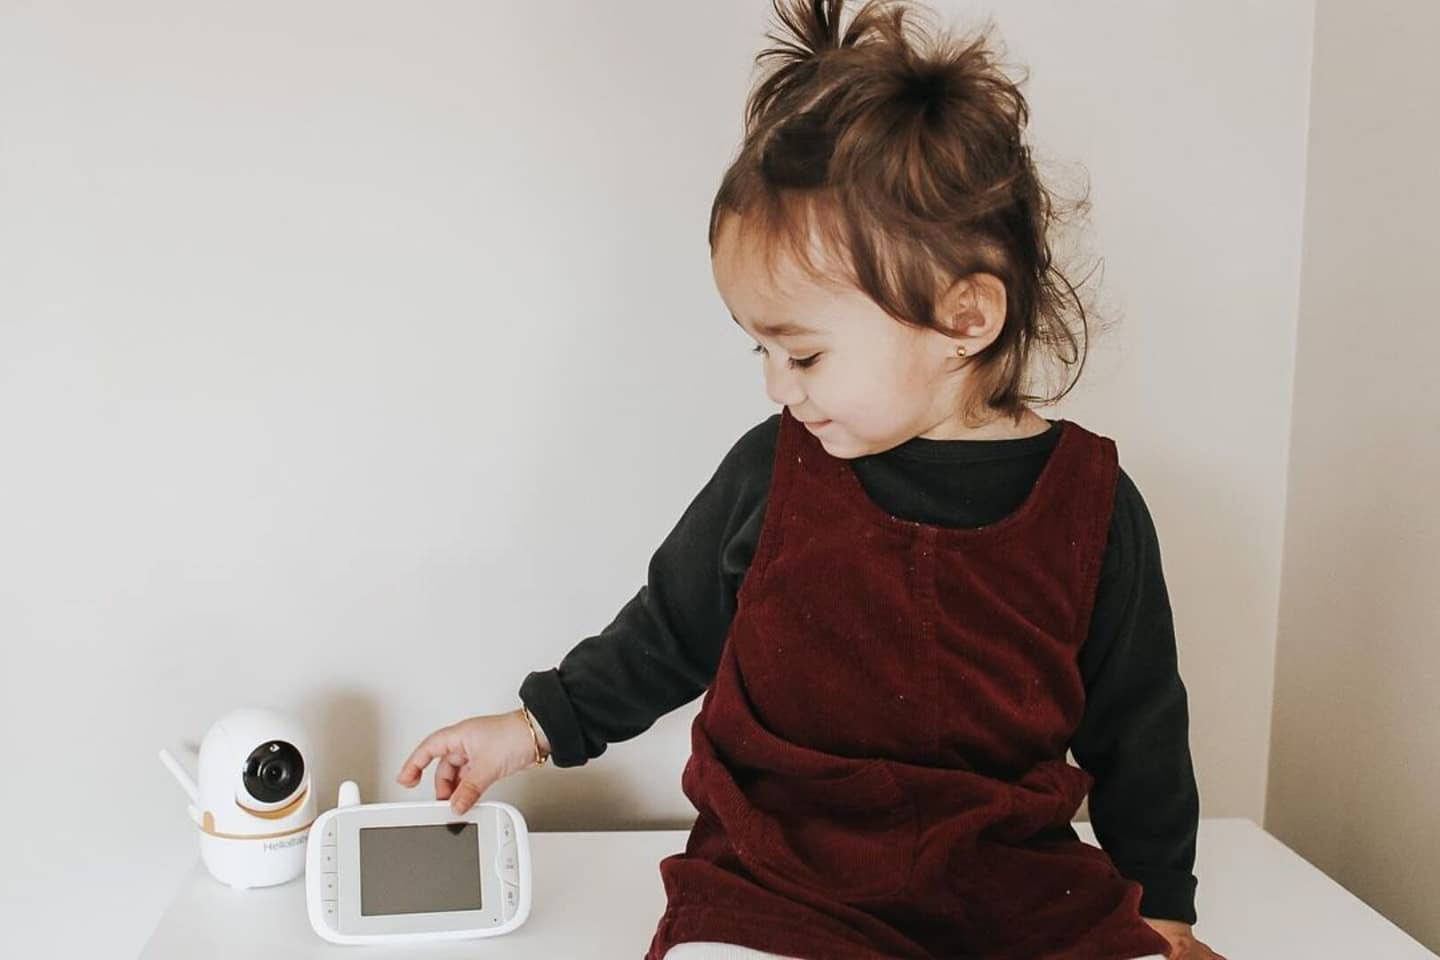 Best non-WiFi baby monitor